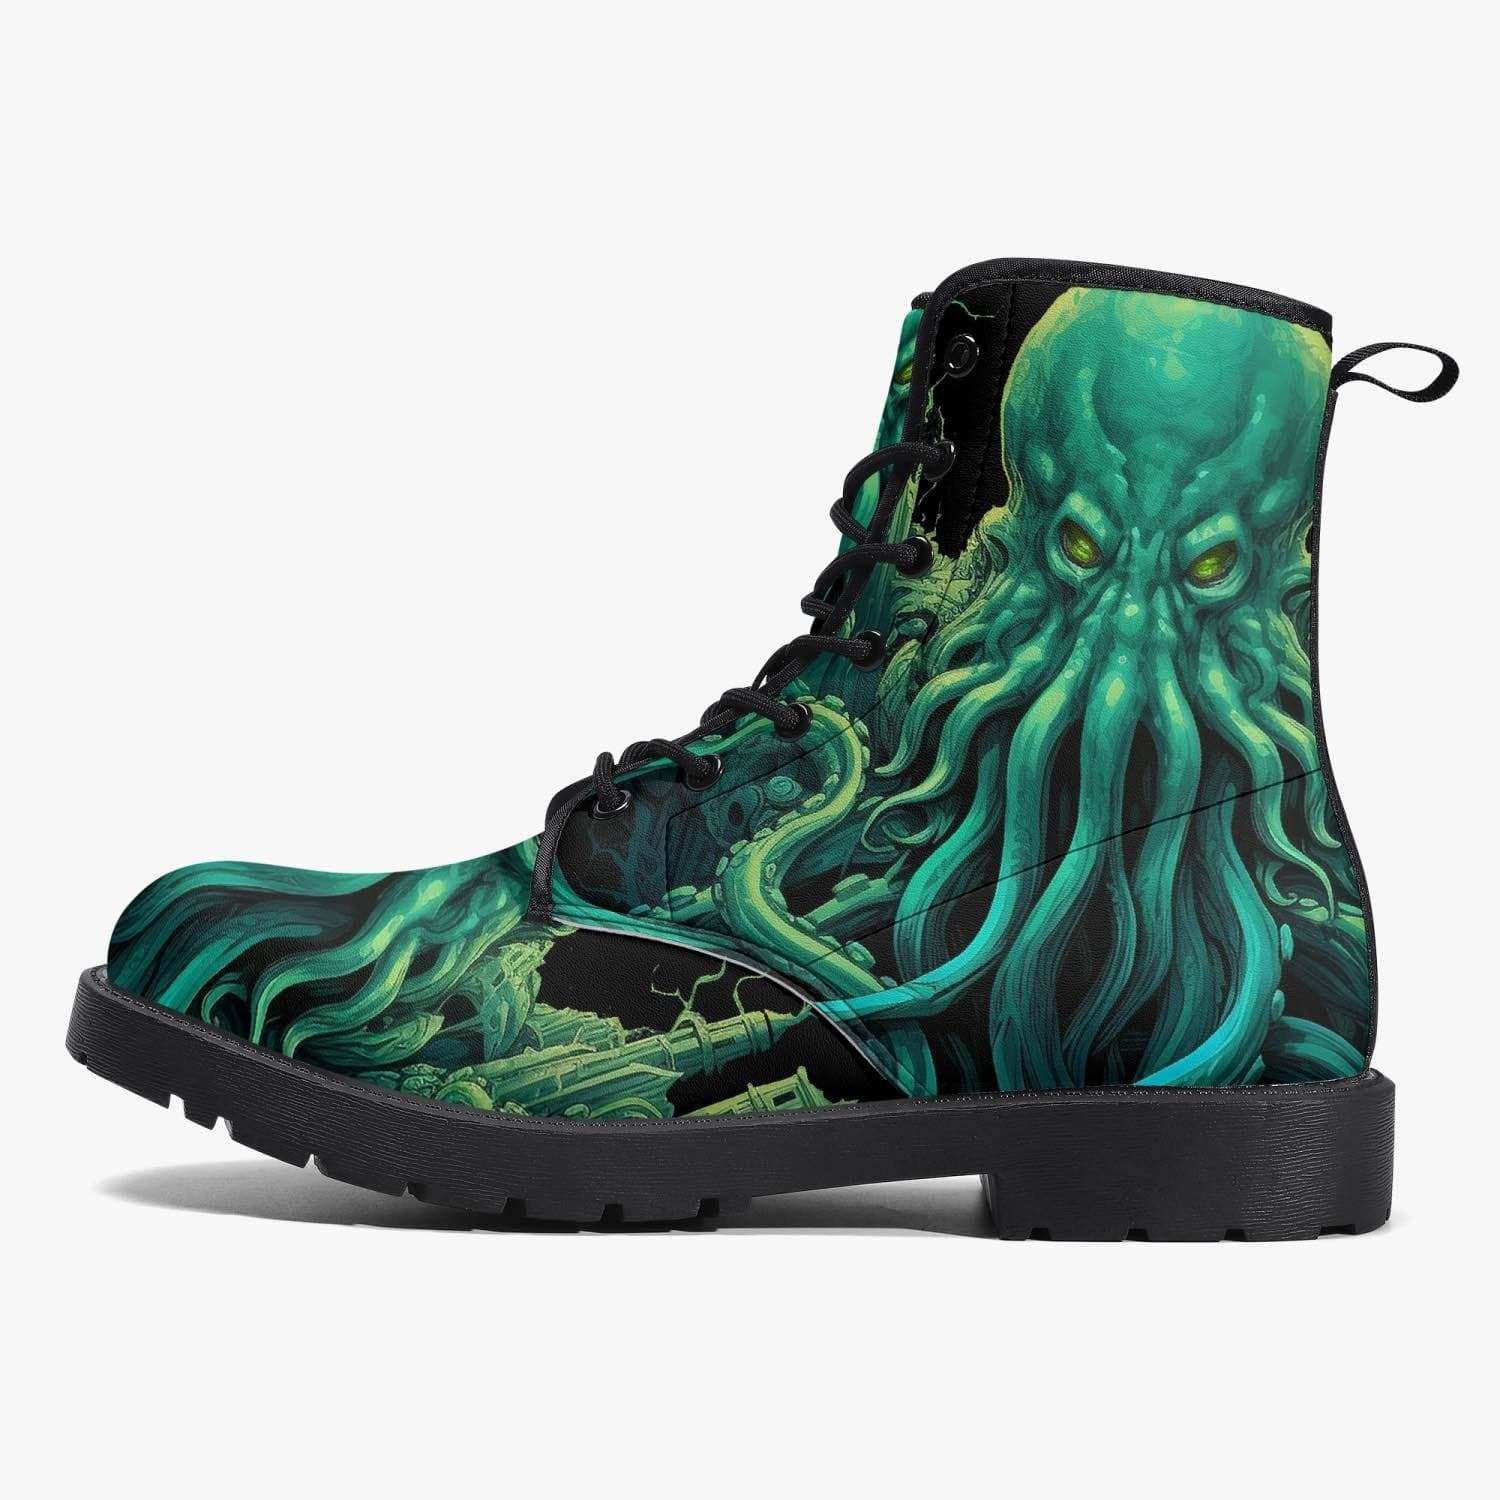 alternative side view of the mighty deep vibrant green and black Cthulhu sea monster on a vegan leather boot at Gallery Serpentine